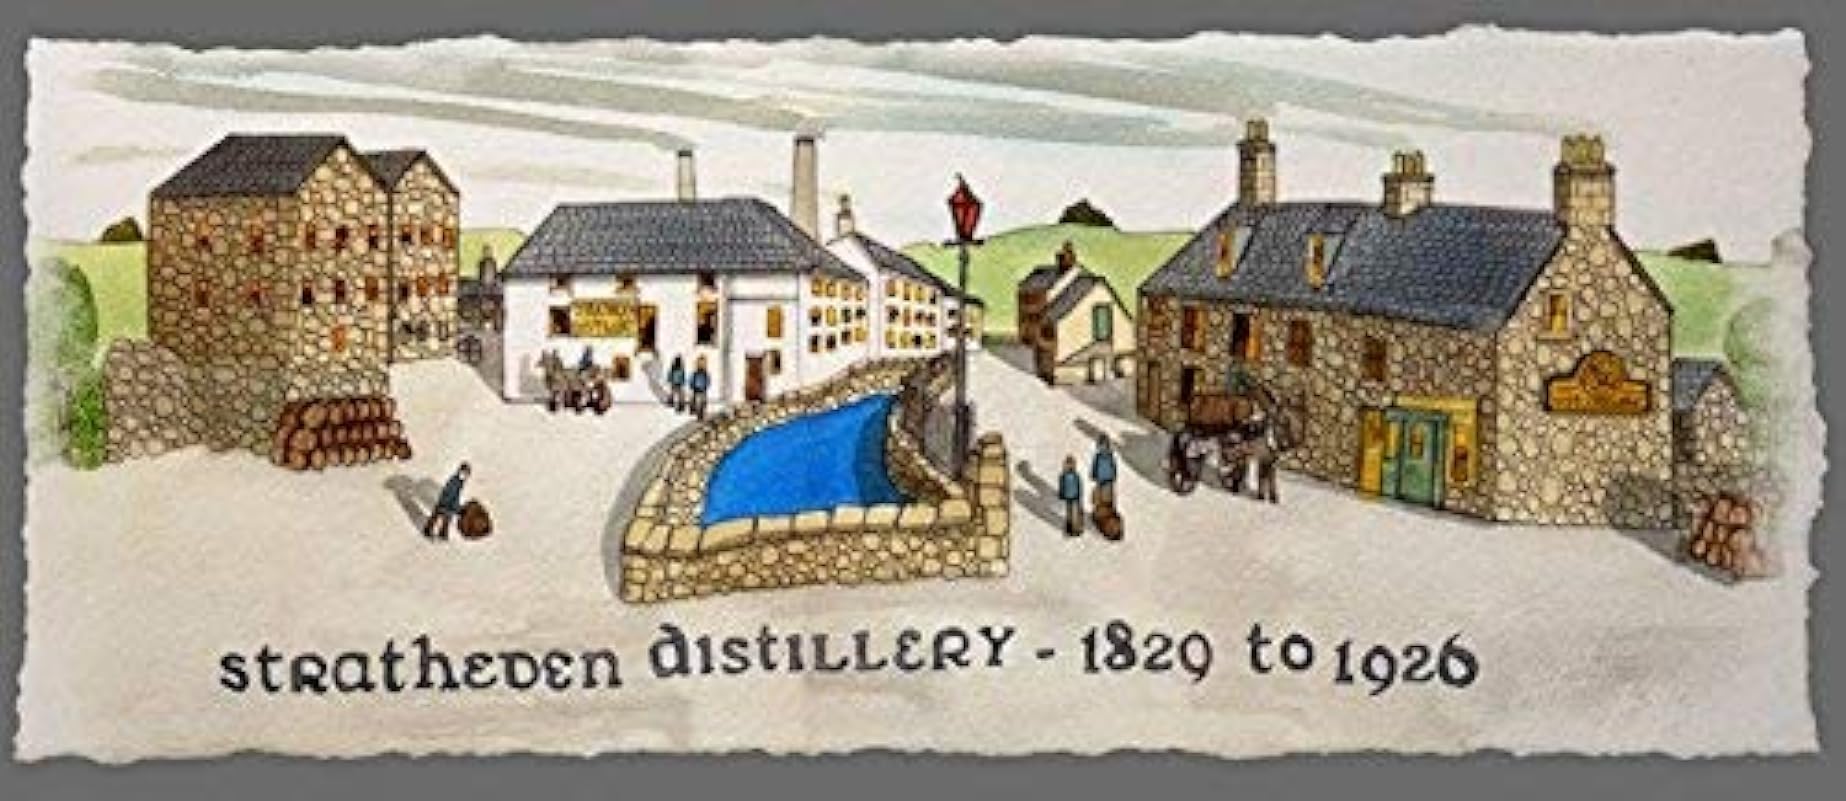 the Lost Distillery Company the Lost Distillery Stratheden Blended Malt Scotch Whisky - 700 ml